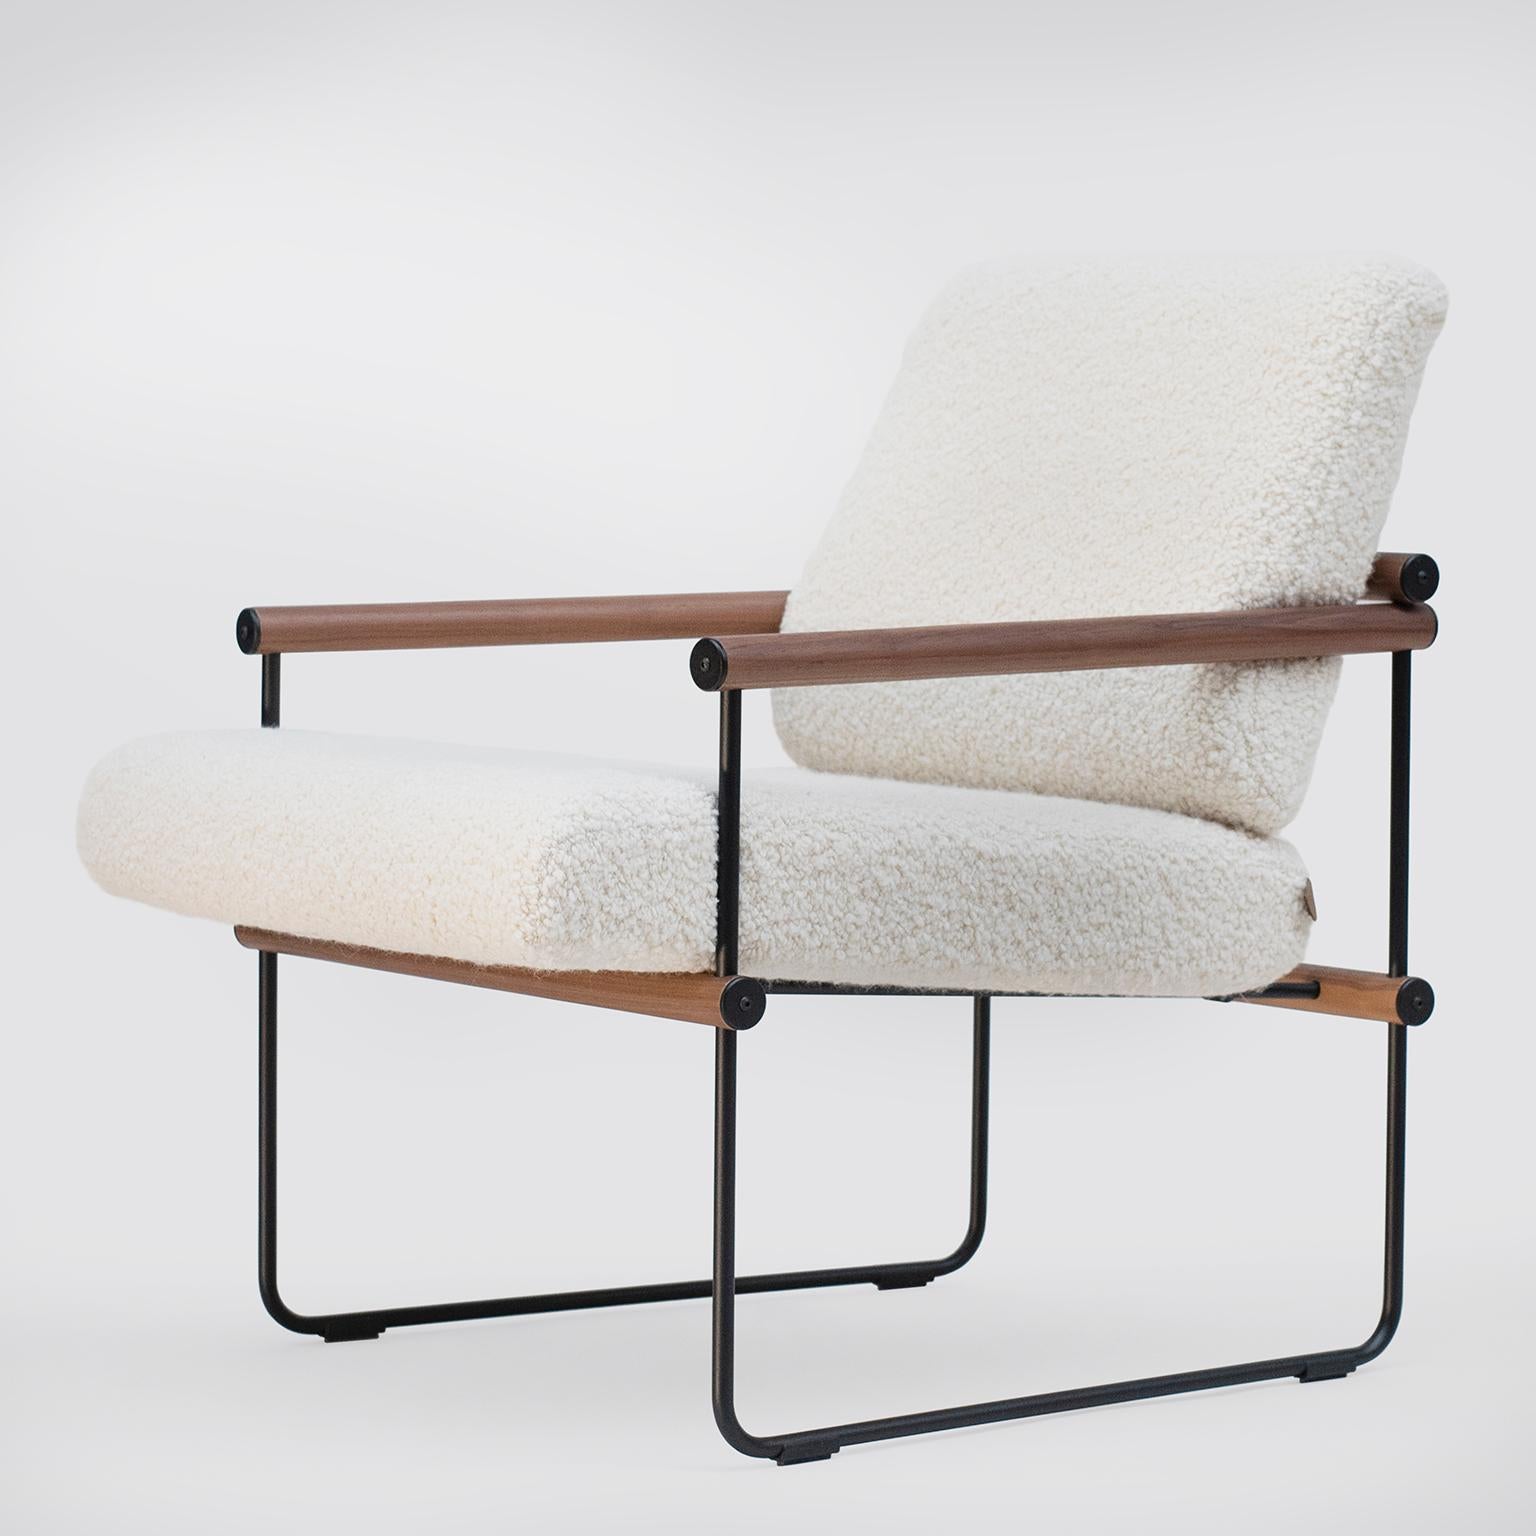 This mid-century modern 'Audrey' S12 is a comfortable light-weight armchair designed by Peter Ghyczy in 2017 and hand-crafted in the GHYCZY atelier in the South of the Netherlands. Since coming on the market in 2017 the 'Audrey' S12 has remained a